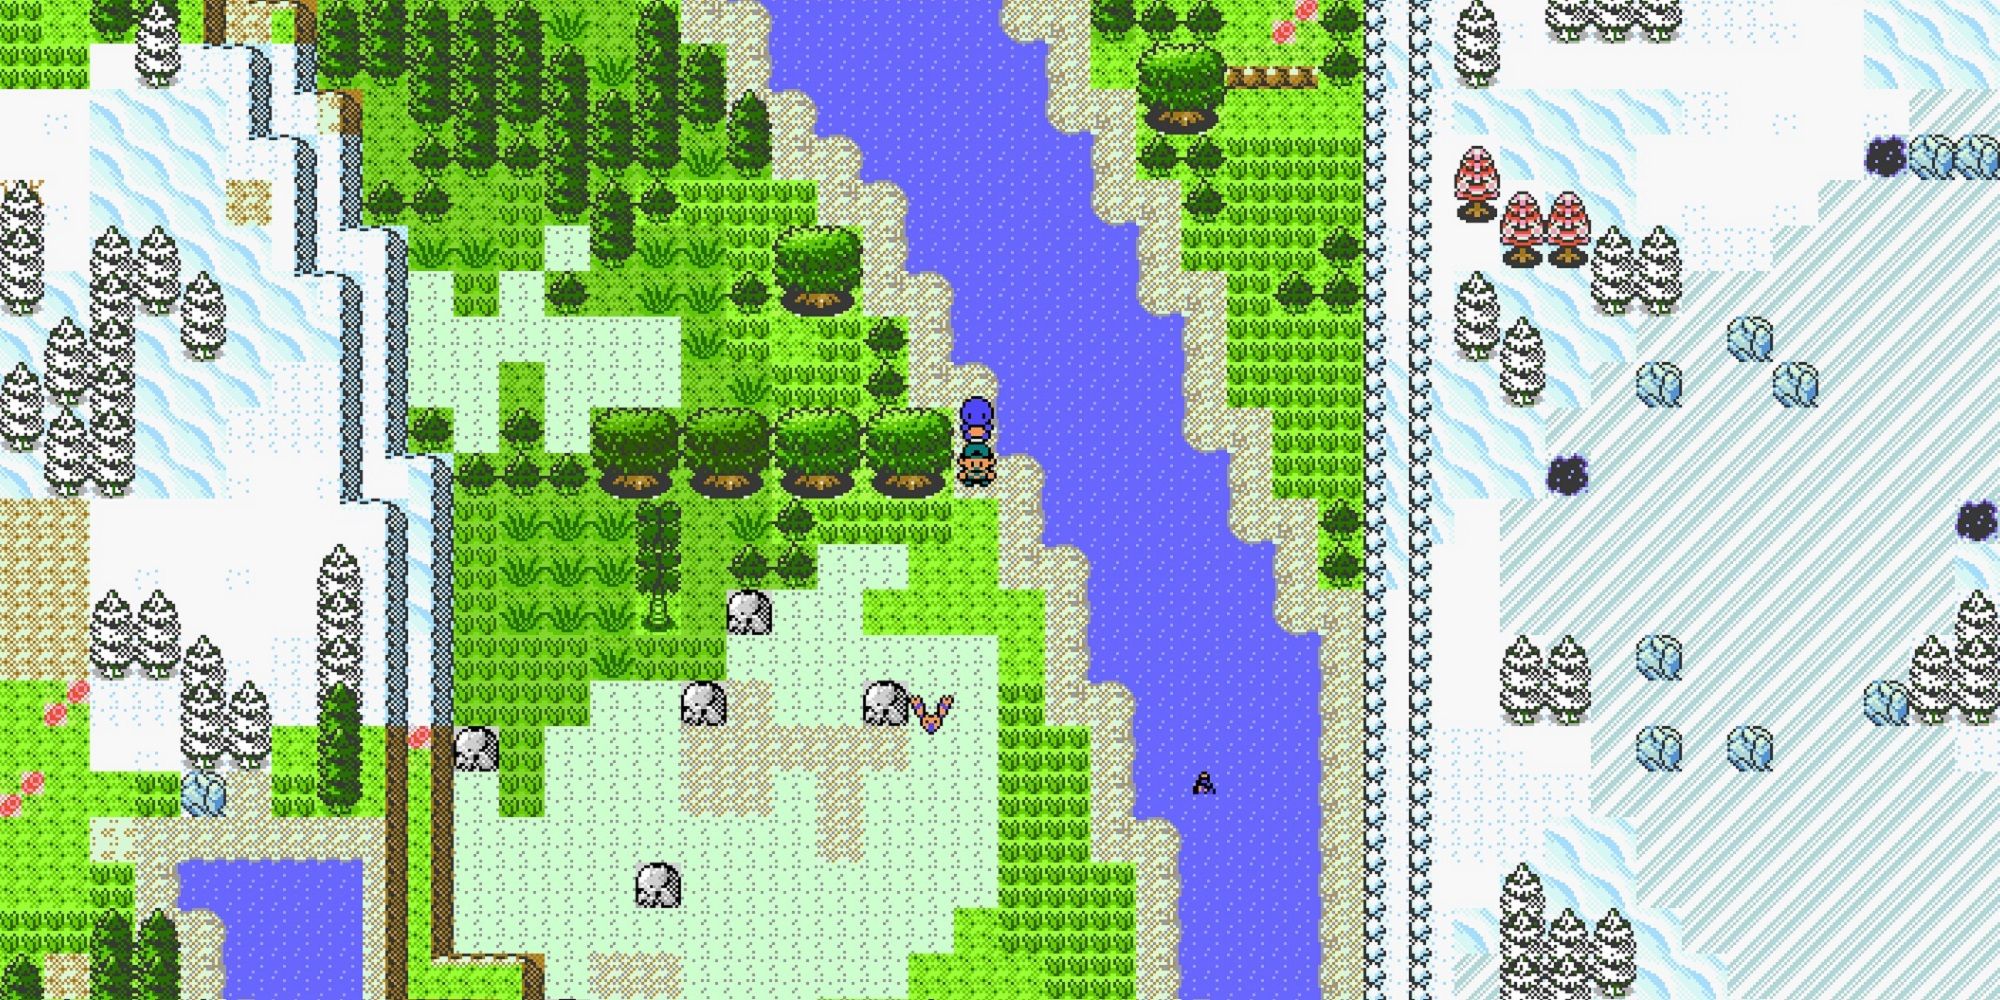 PokeWilds Is An Open World Pokemon Game With Gen 2 Graphics 3